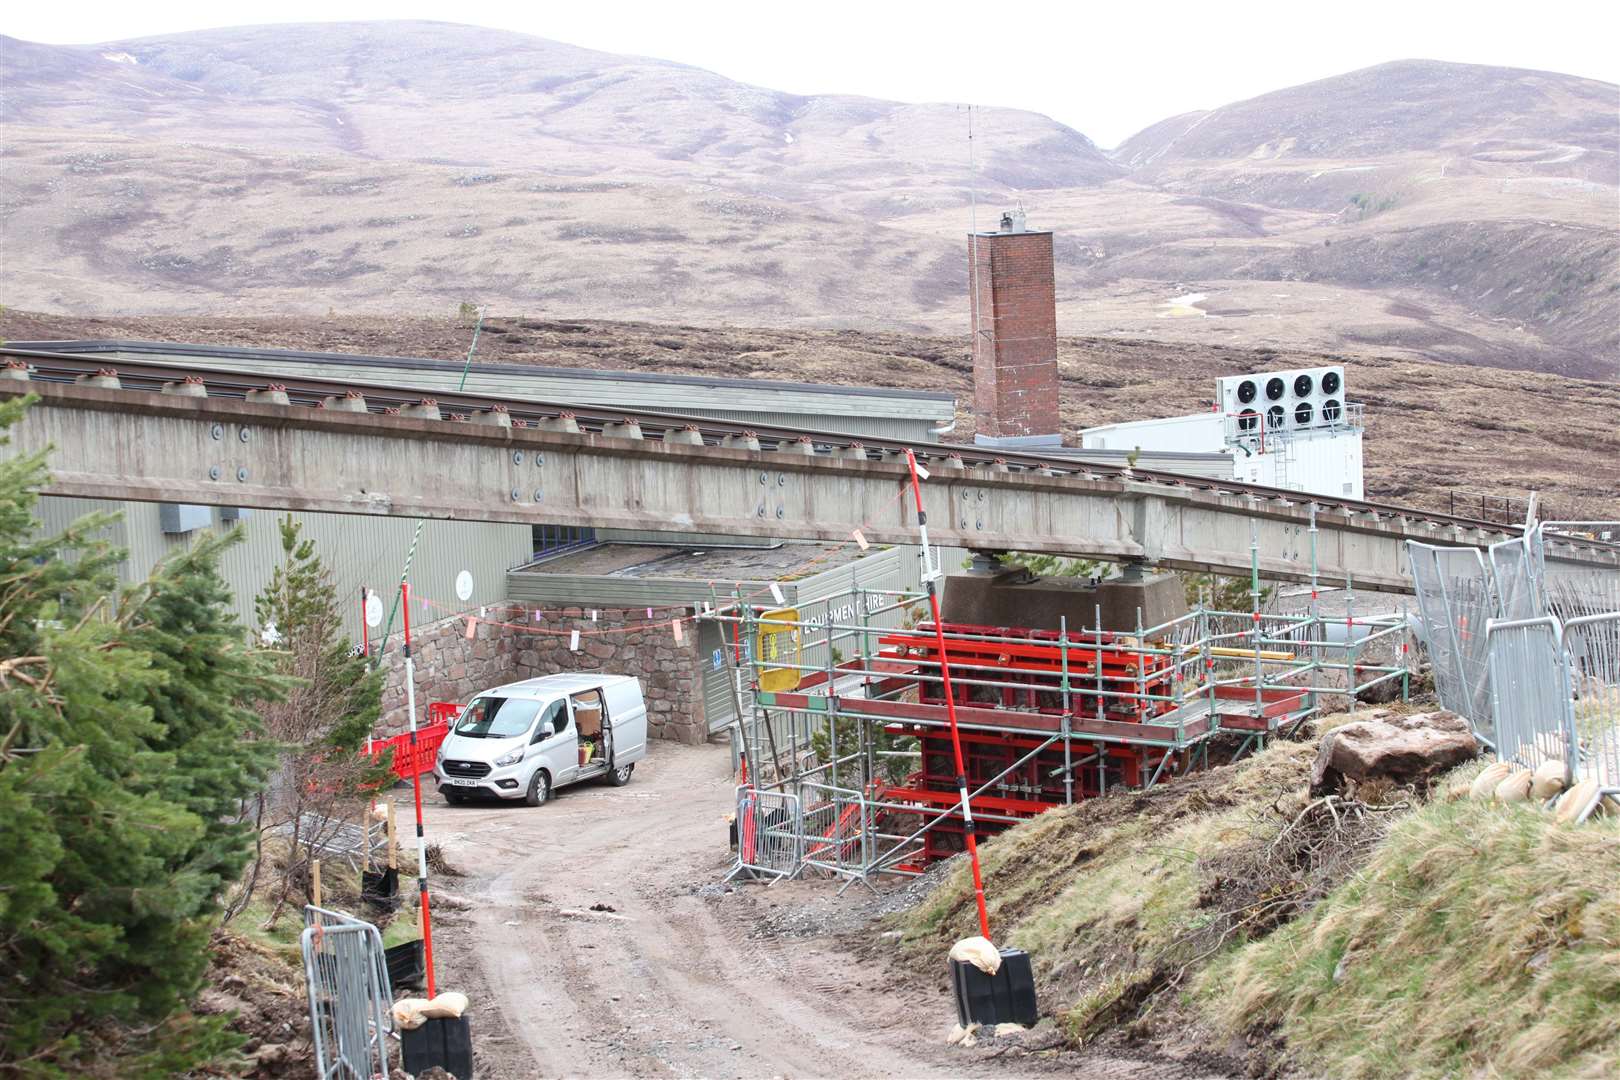 A range of factors including weather and problems getting in demand building materials has hampered funicular repair.